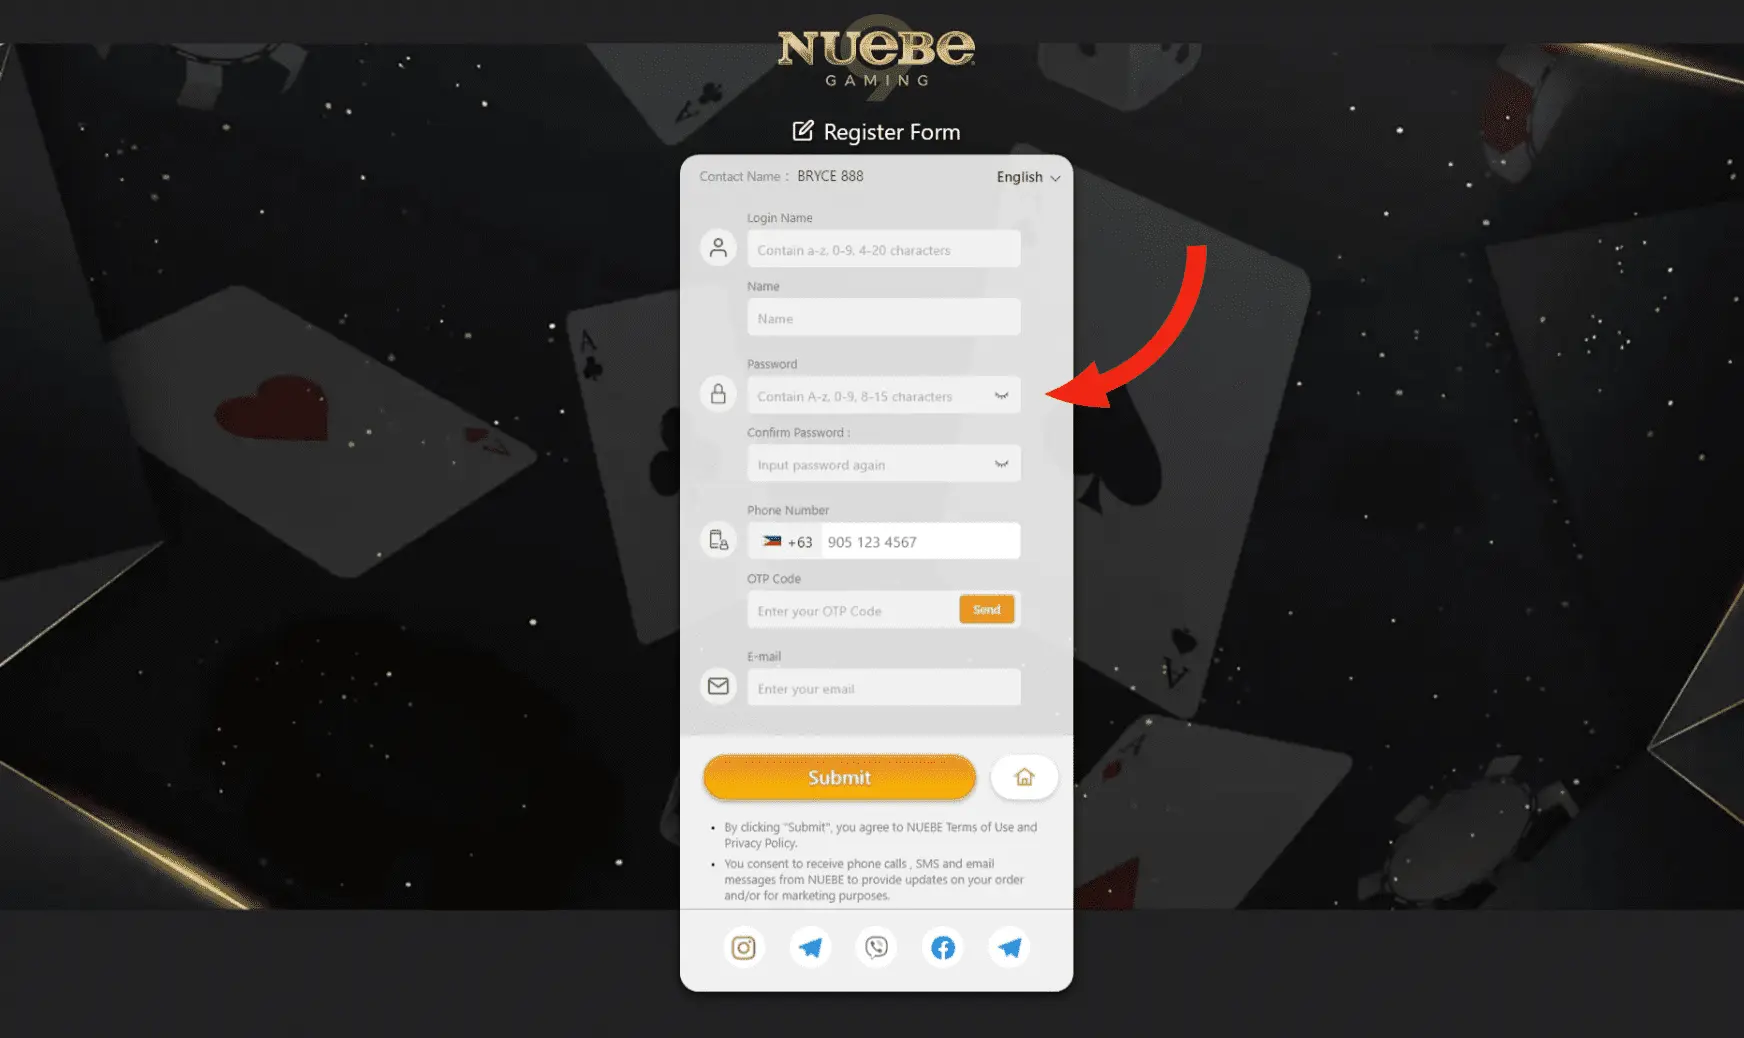 Screenshot highlighting the 'Password' field in Nuebe Gaming sign up form, emphasizing secure password criteria amid a cosmic casino setting.